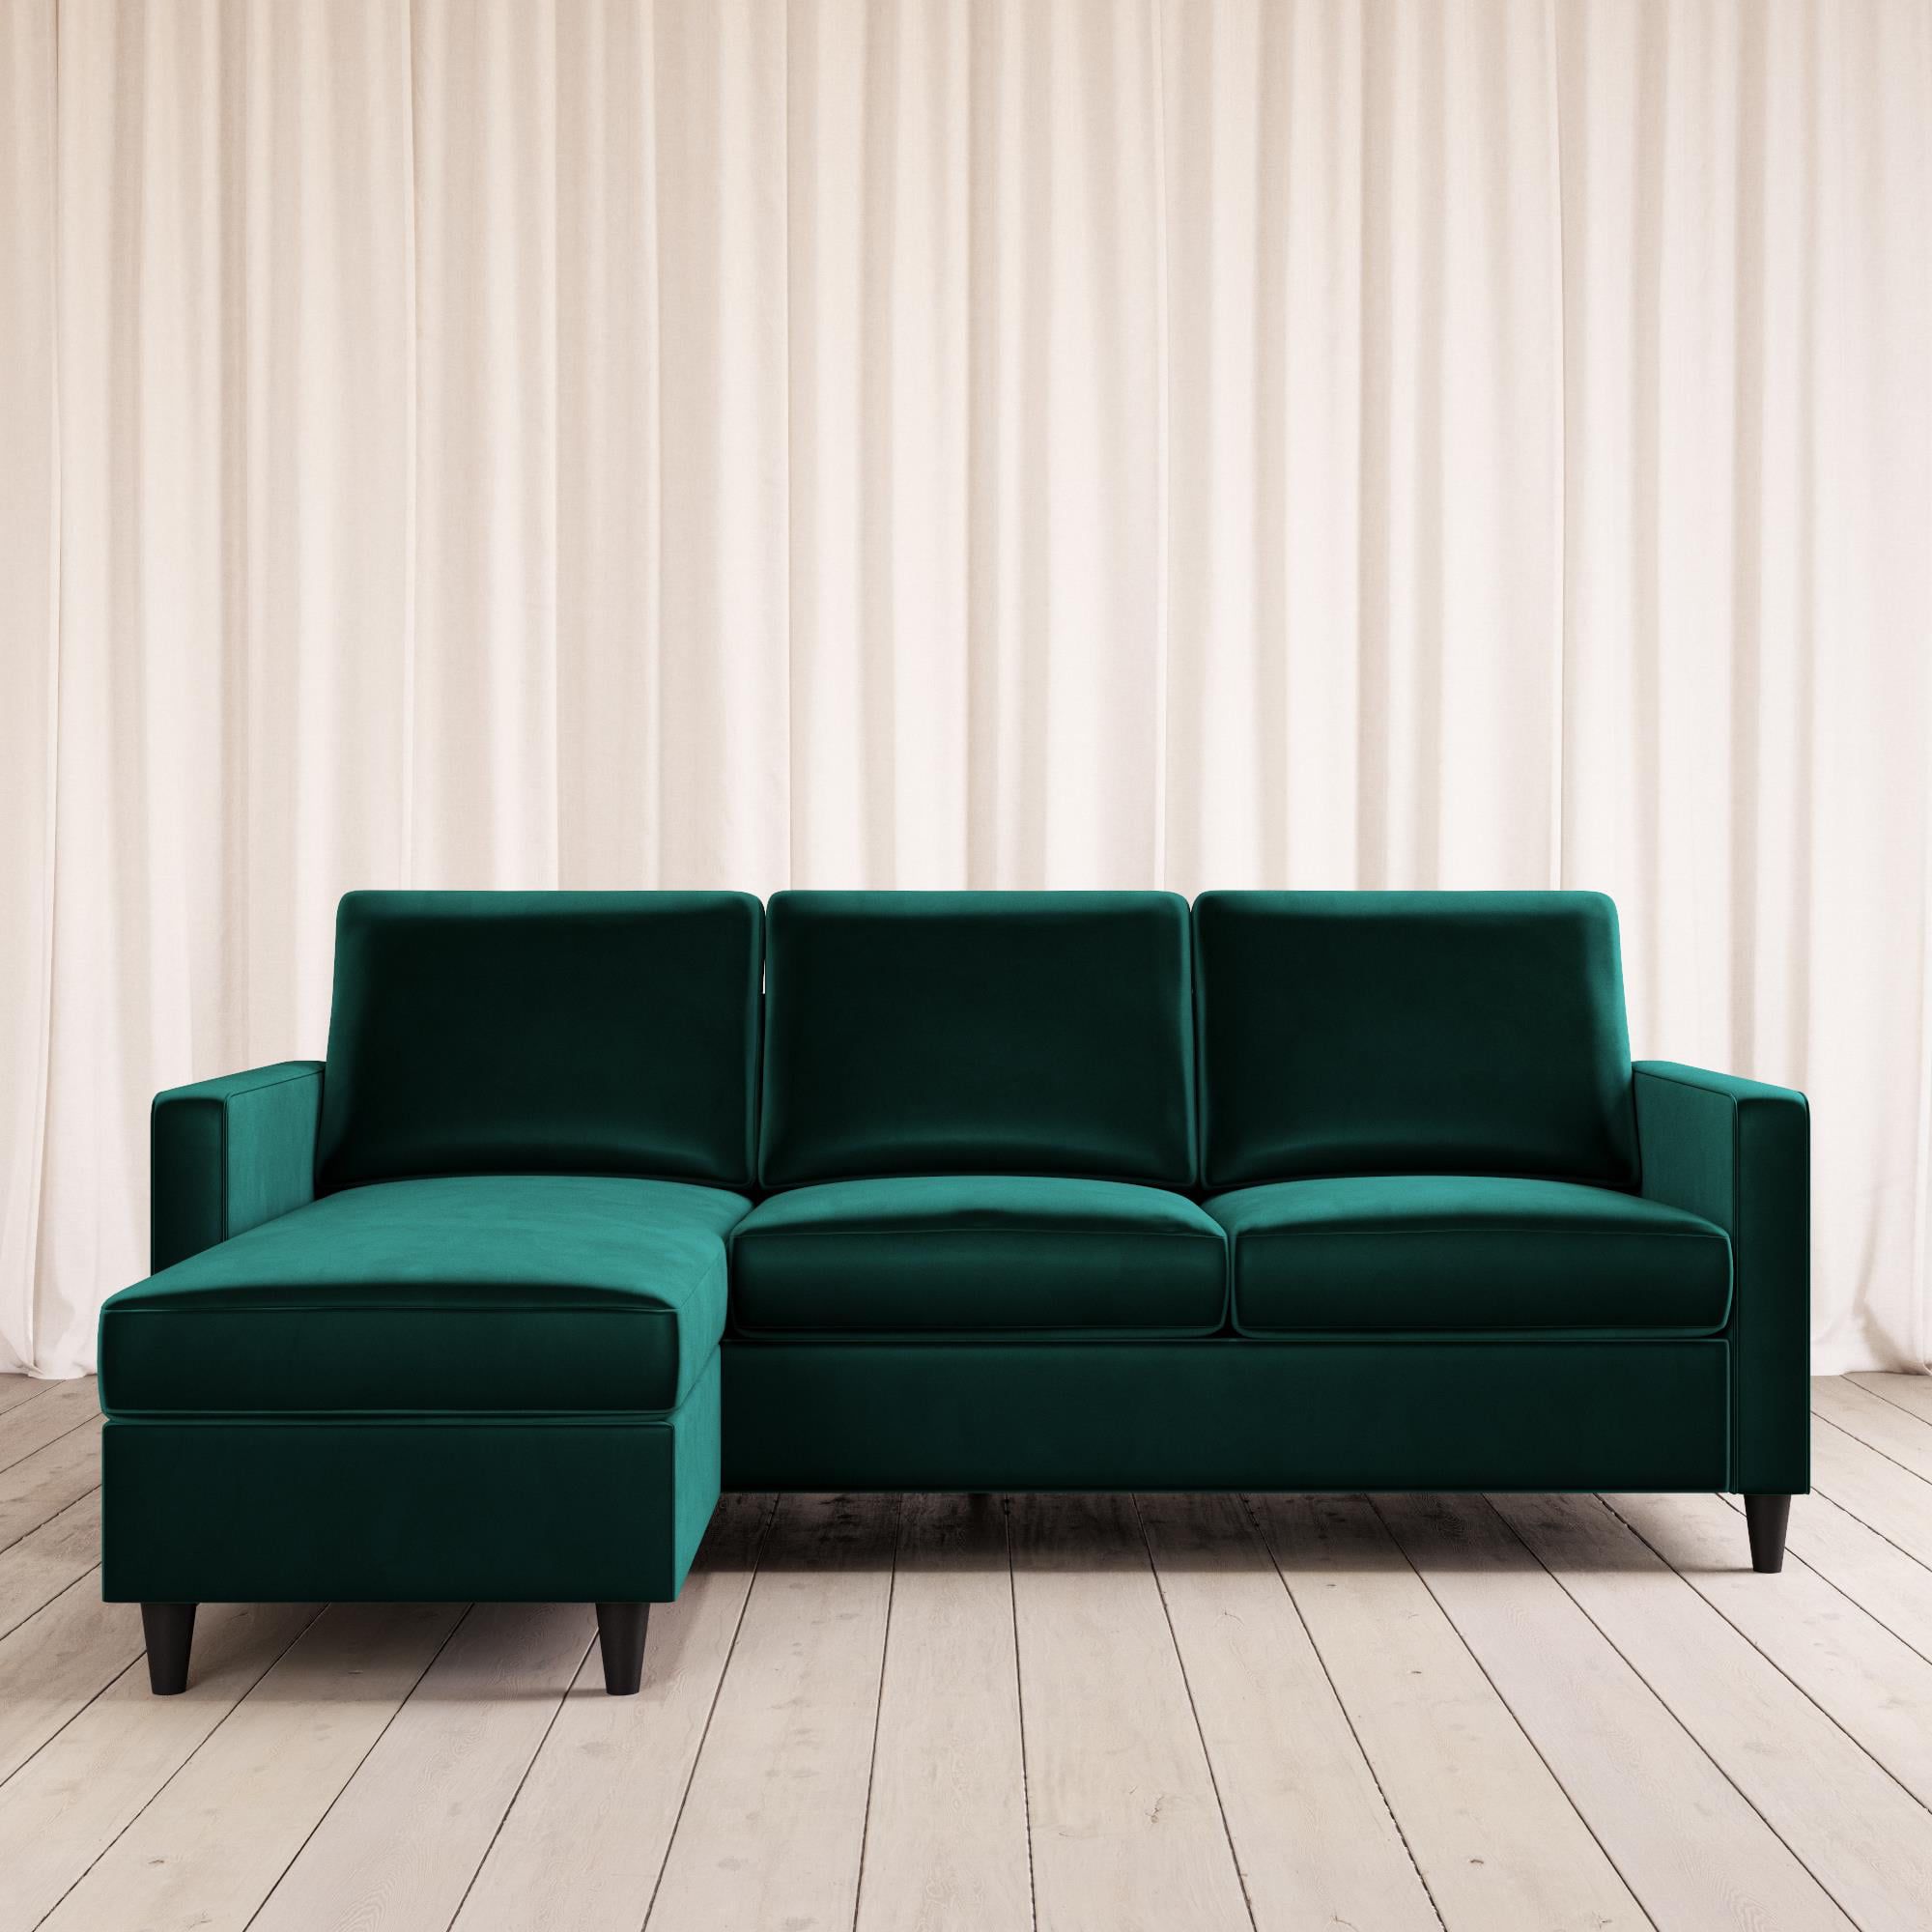 Dhp Cooper Modern Sectional Sofa, Green Velvet – Walmart – Walmart For Most Popular Green Velvet Modular Sectionals (View 4 of 15)